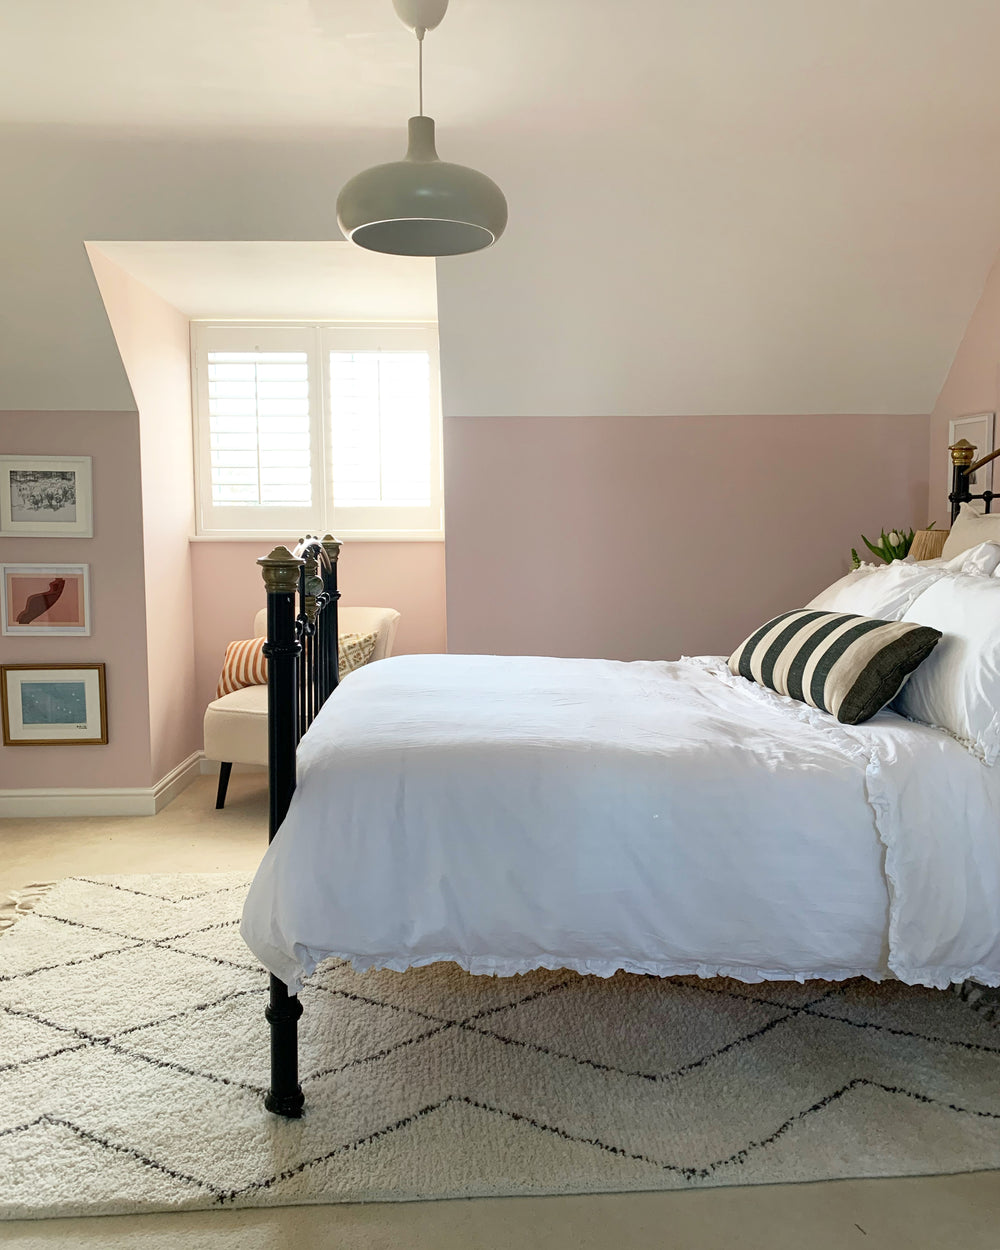 coat-paint-percy-flat-matt-paint-candy-pink-briths-paint-interior-sustainablecoat-paint-percy-flat-matt-paint-candy-pink-briths-paint-interior-sustainable-bedroom